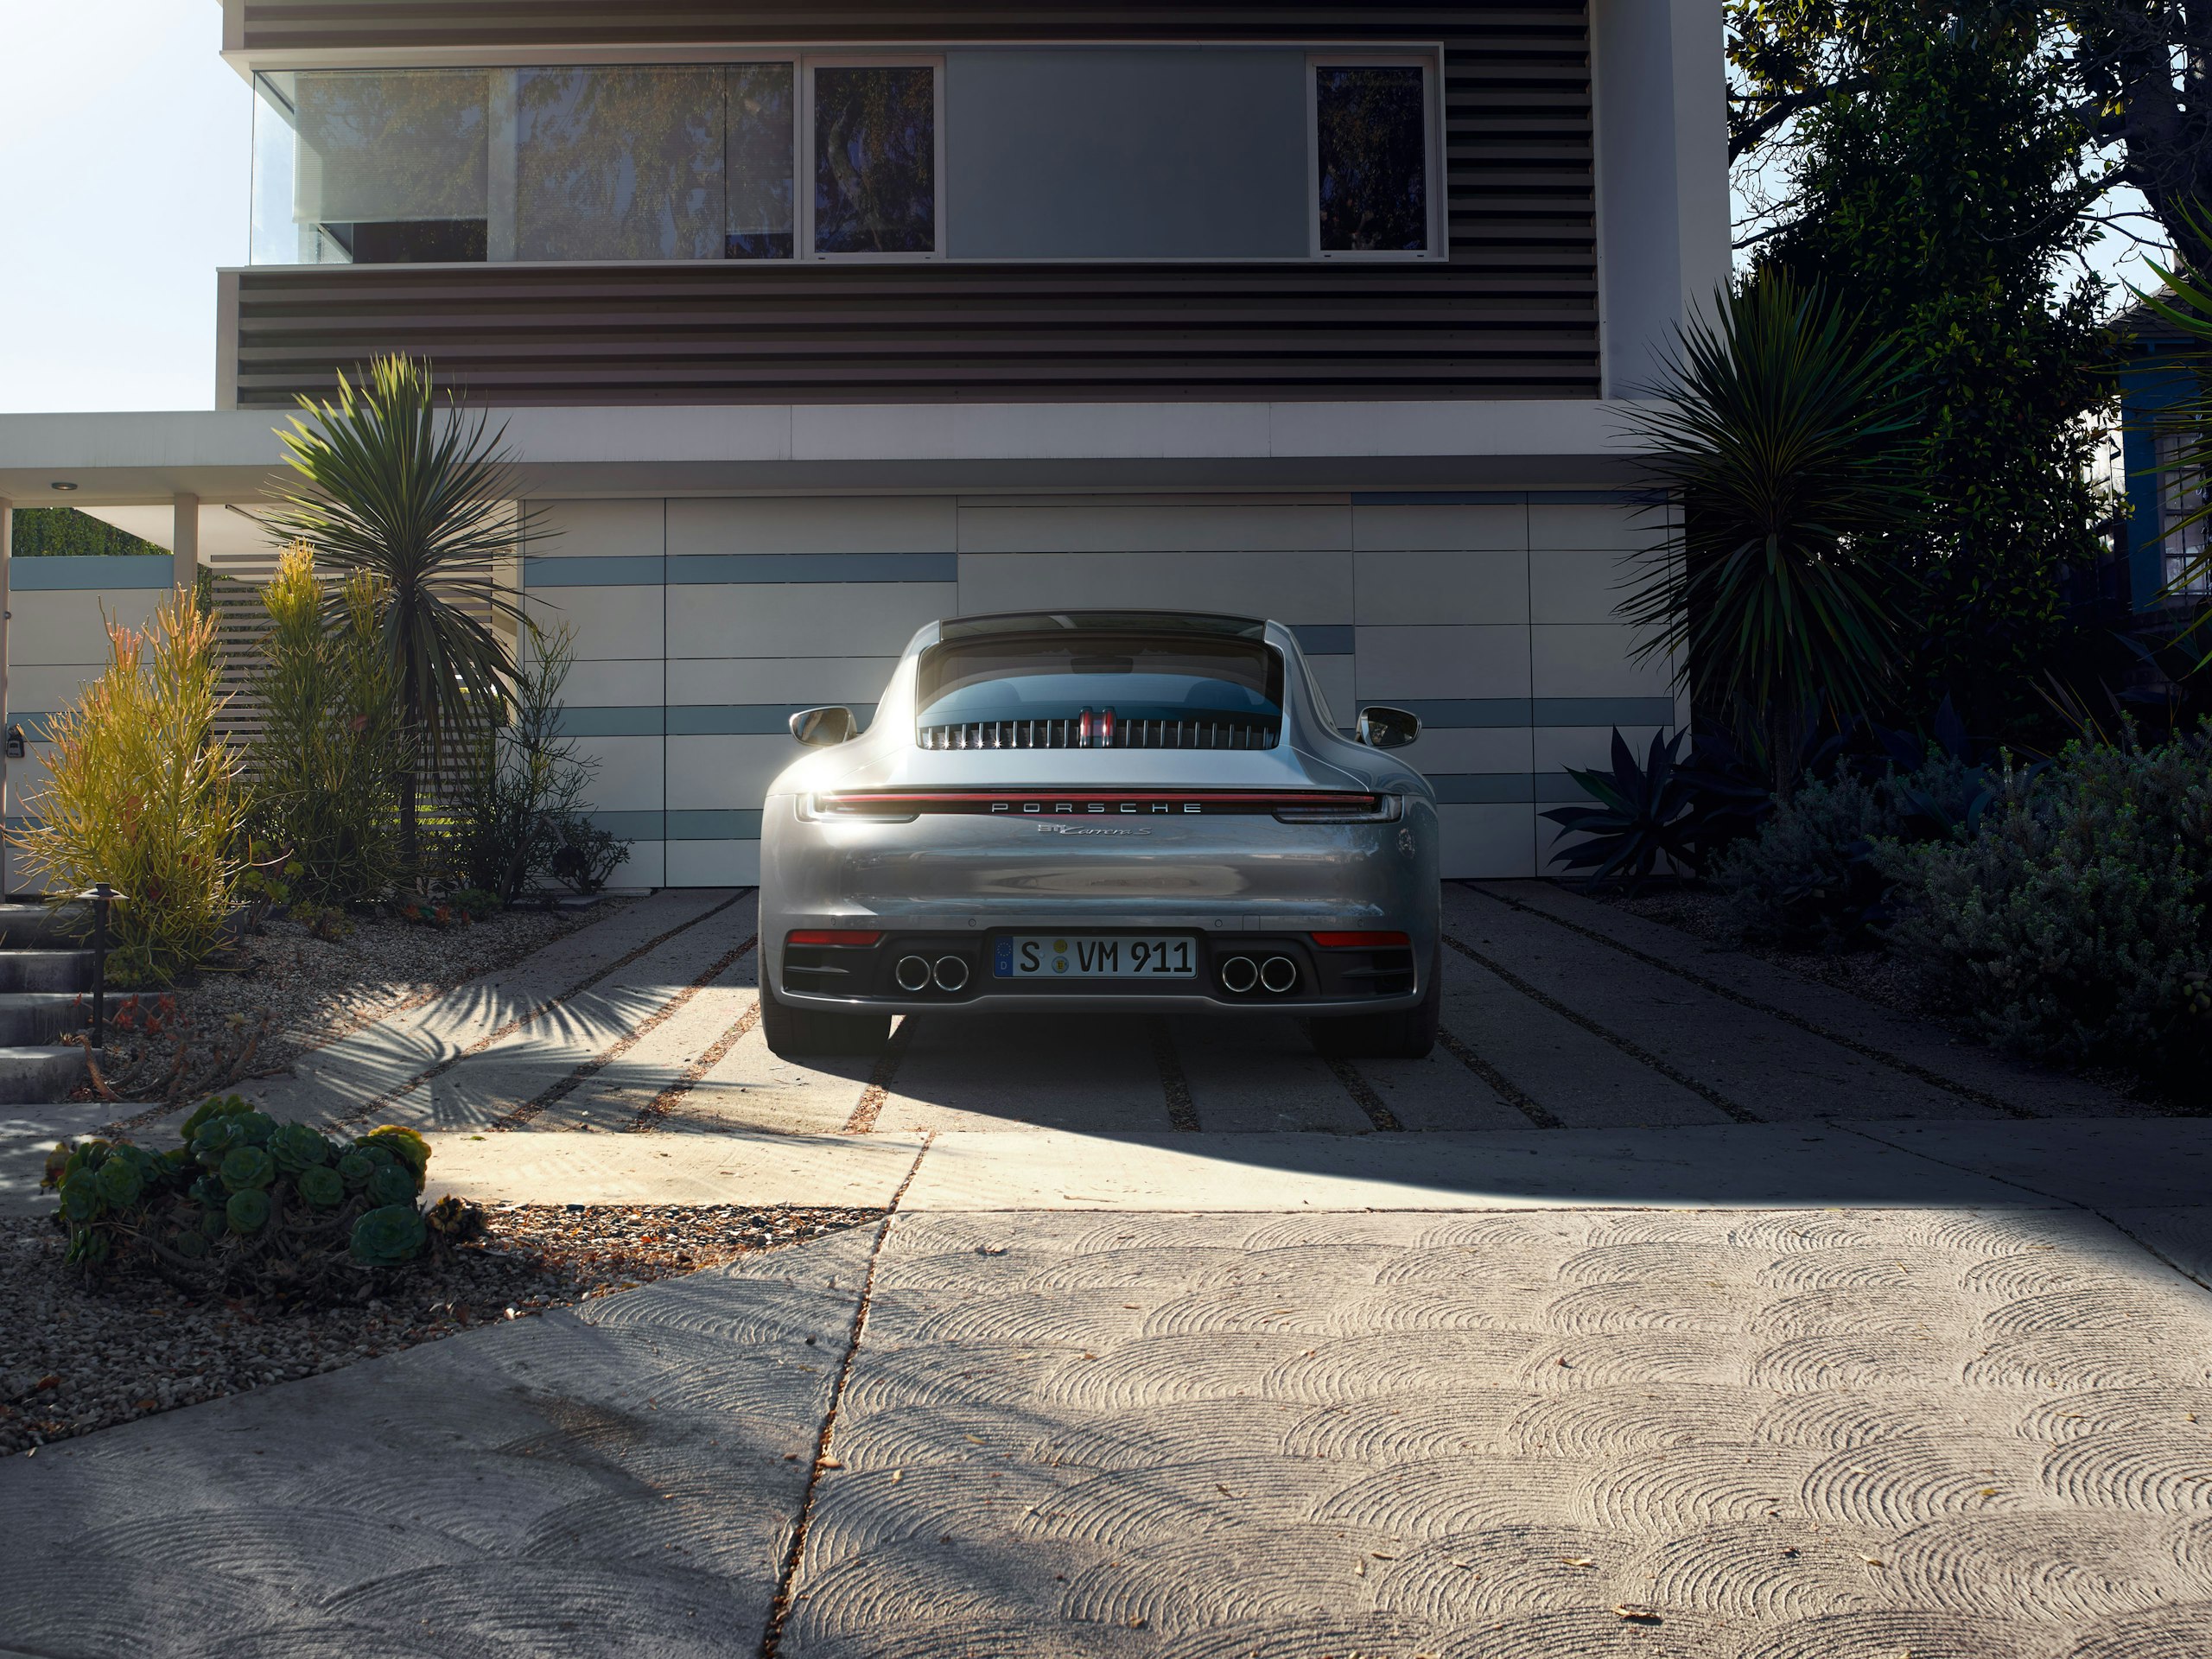 Rear shot of an anthracite 911 Carrera S parked in front of a modern residential building next to palm trees in the sunset